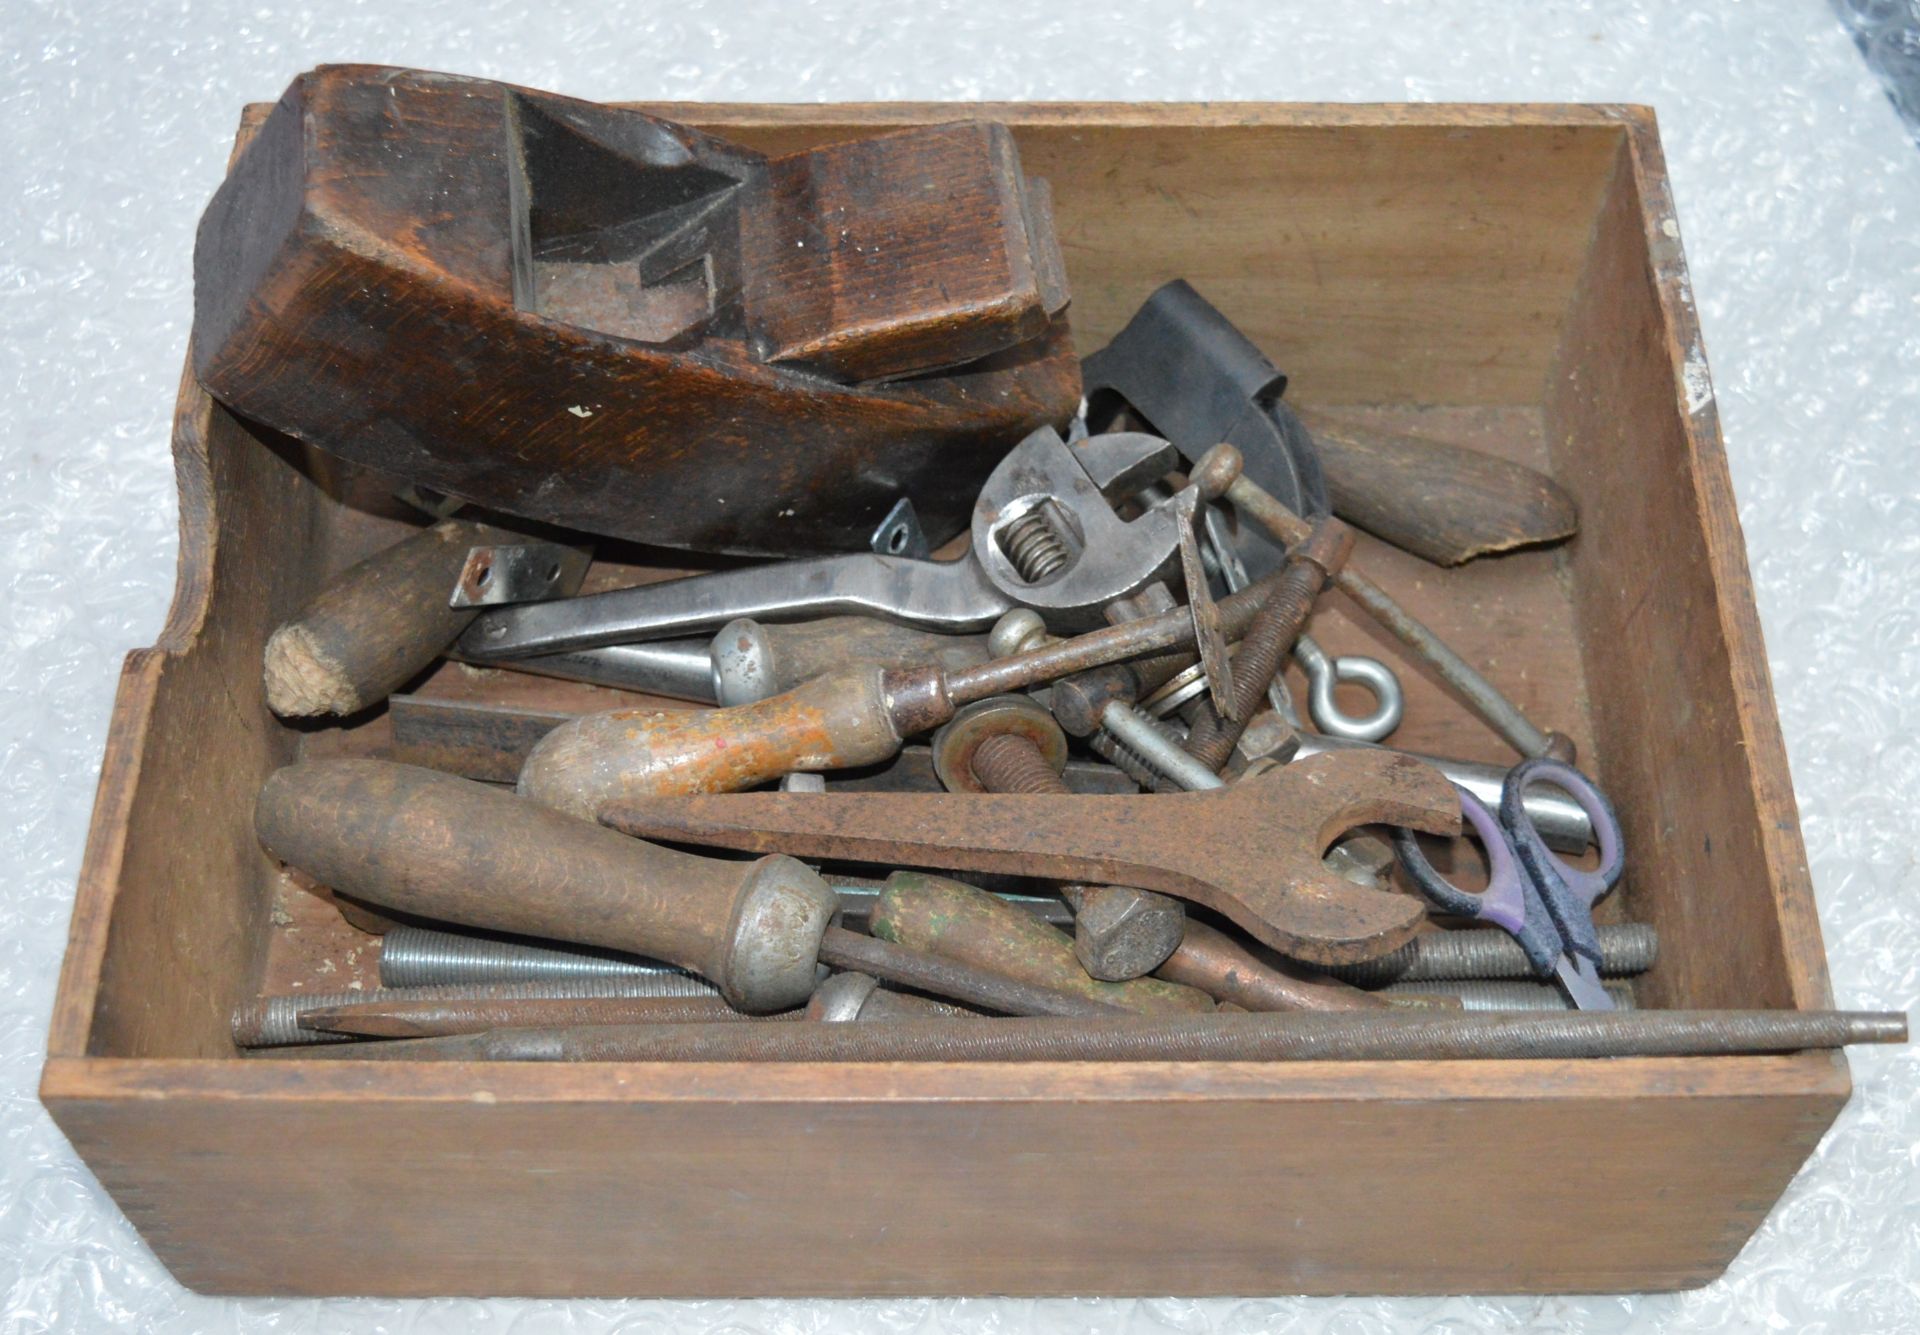 1 x Assorted Lot of Vintage Tools, Files, Rods and More - Includes More Than 30 Pieces Including - Image 22 of 22